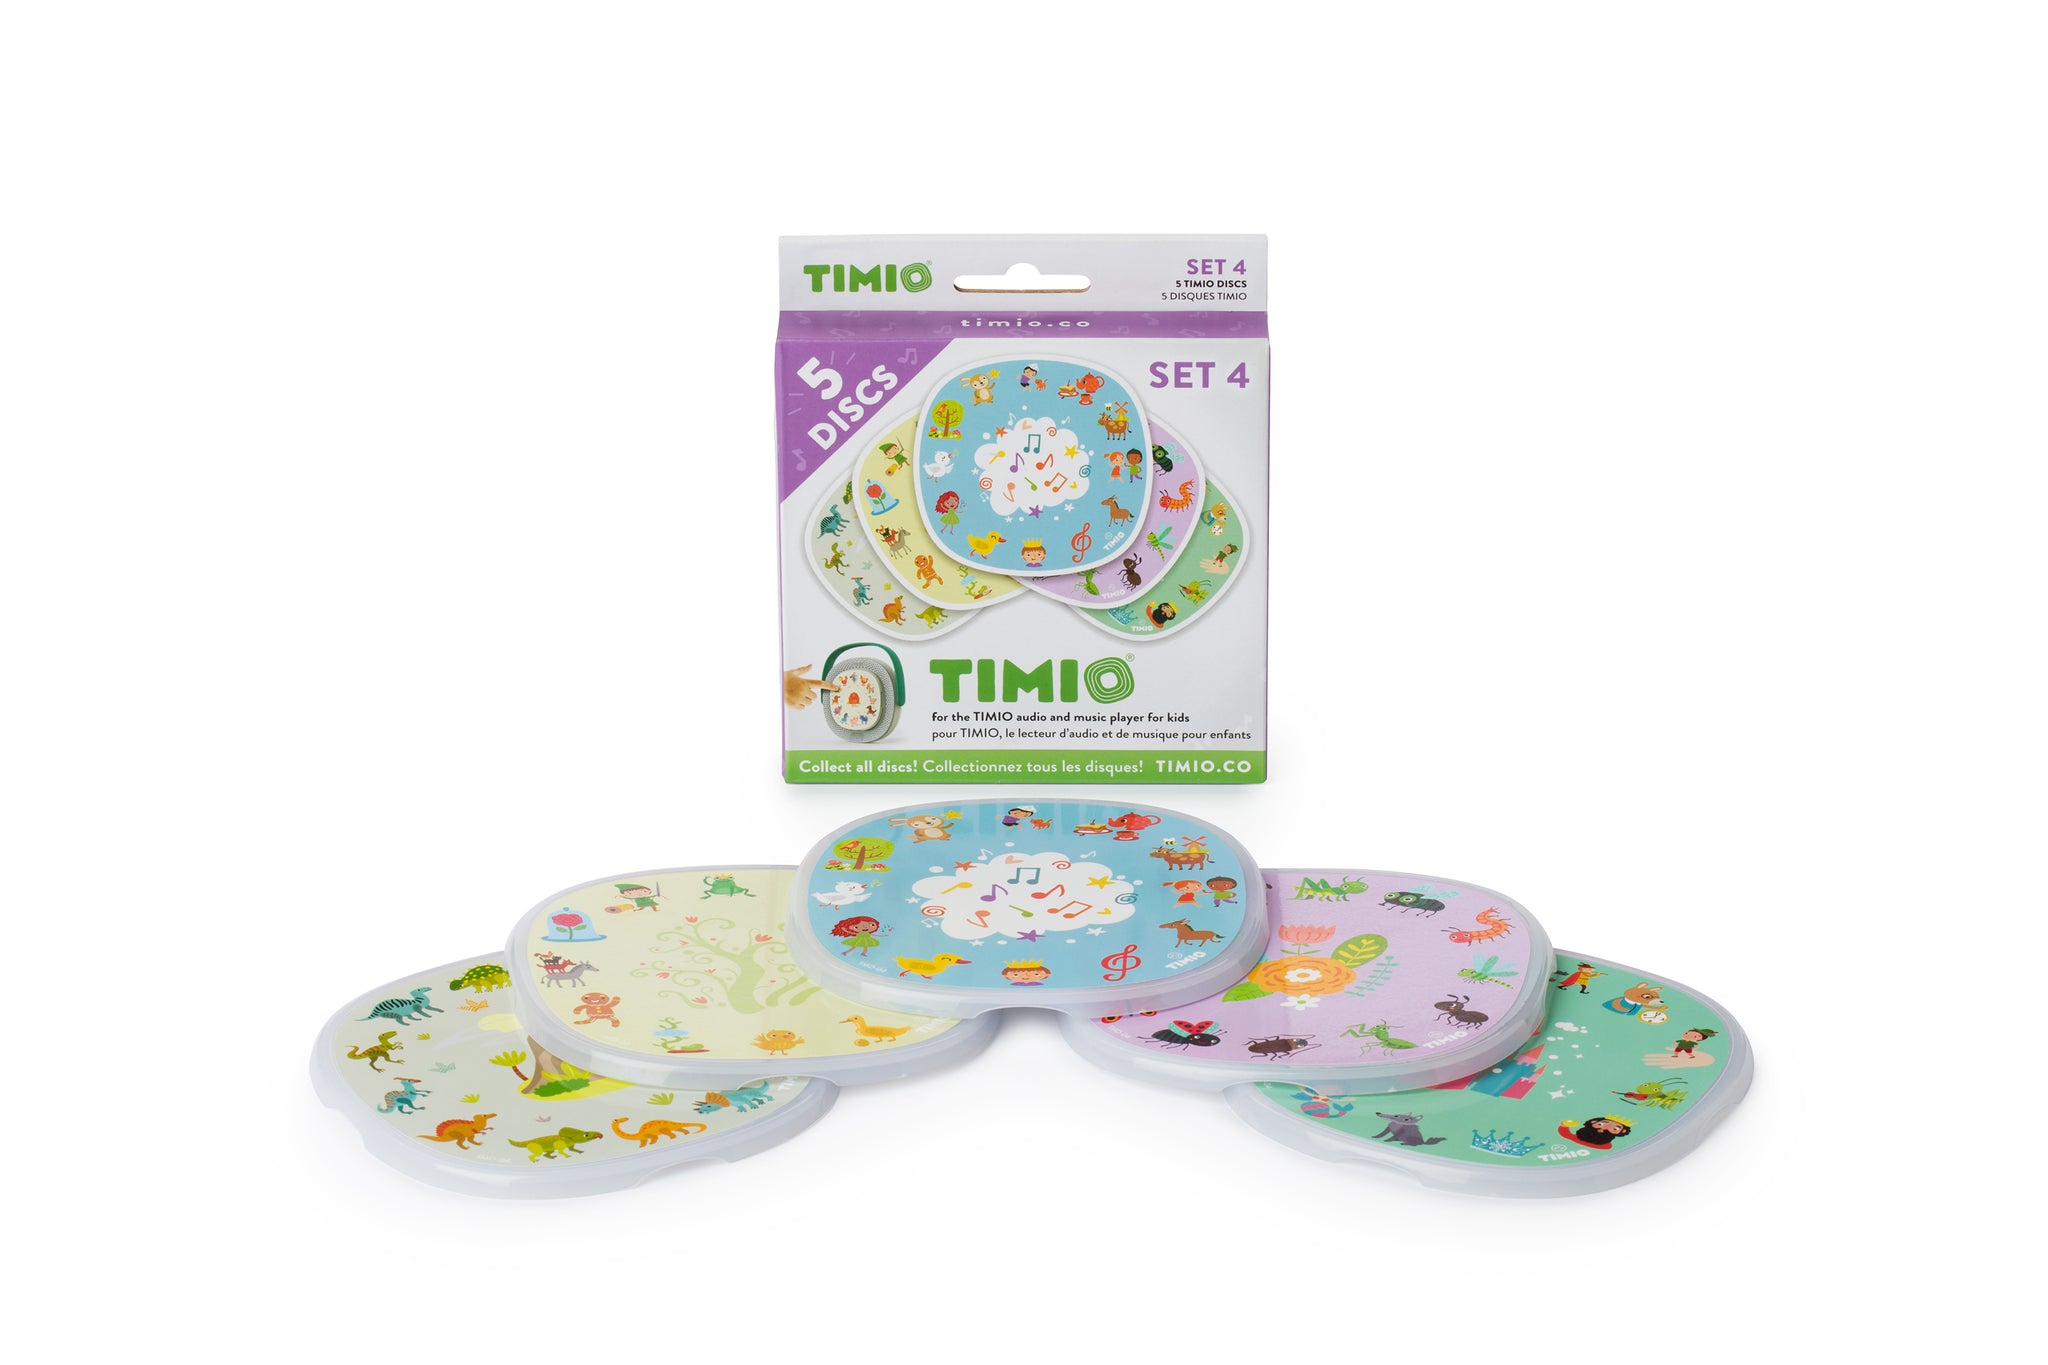 TIMIO - Disc Set #4 – Playwell Canada Toy Shop